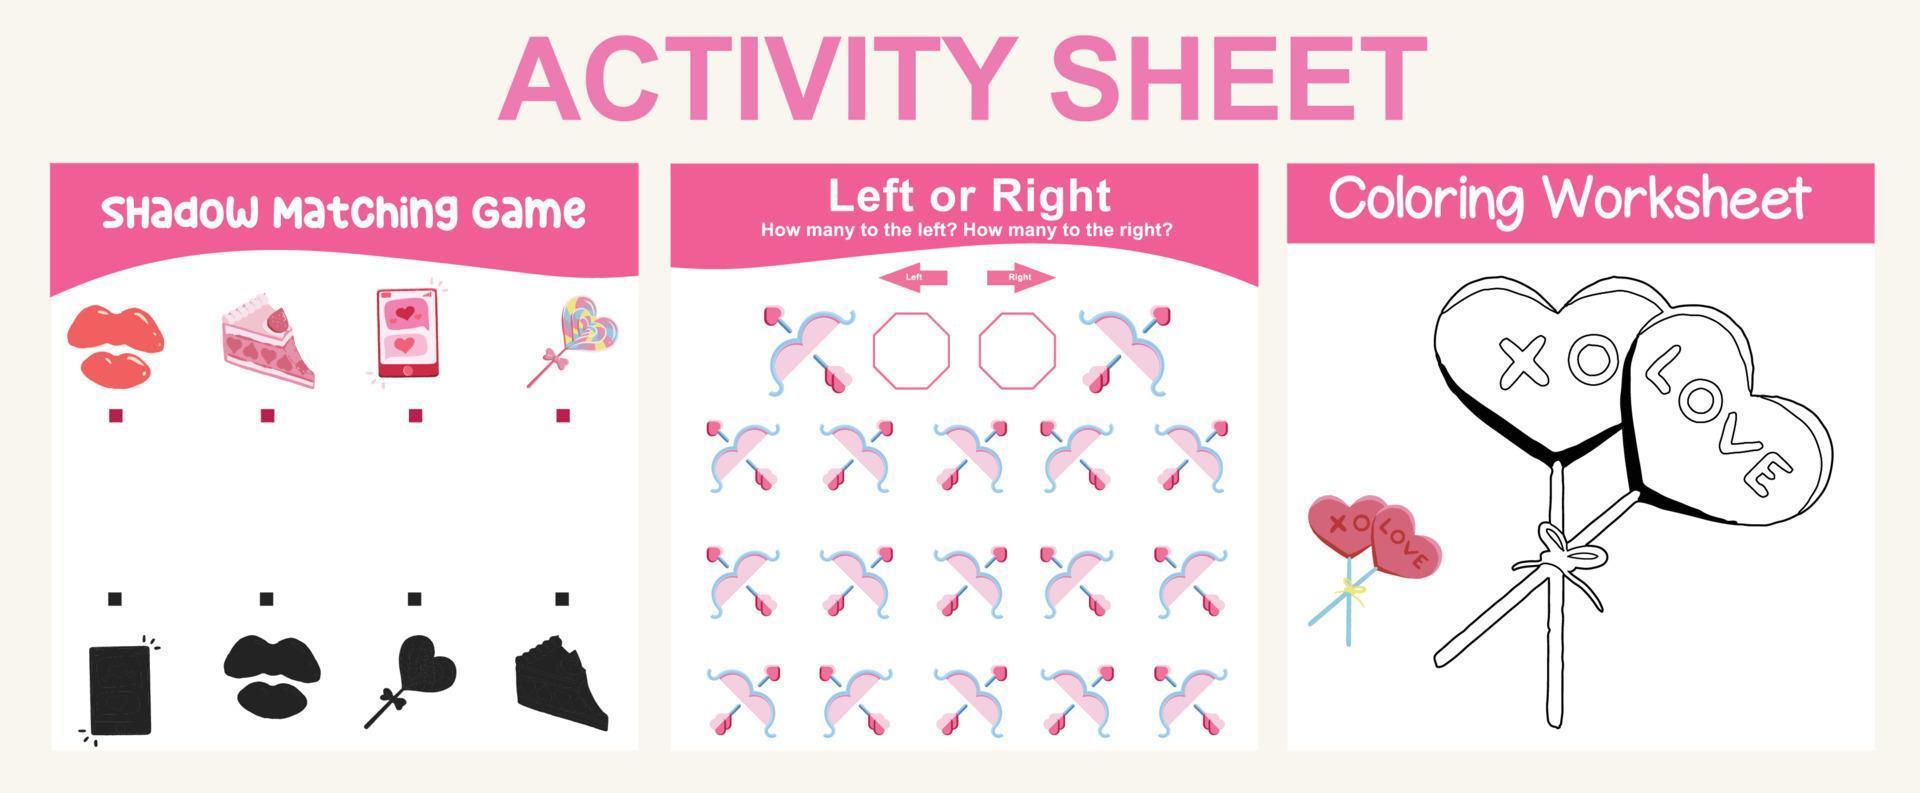 3 in 1 activity sheet for children. Educational printable worksheet. Shadow matching game, tracing lines and coloring activity worksheet. Vector file.